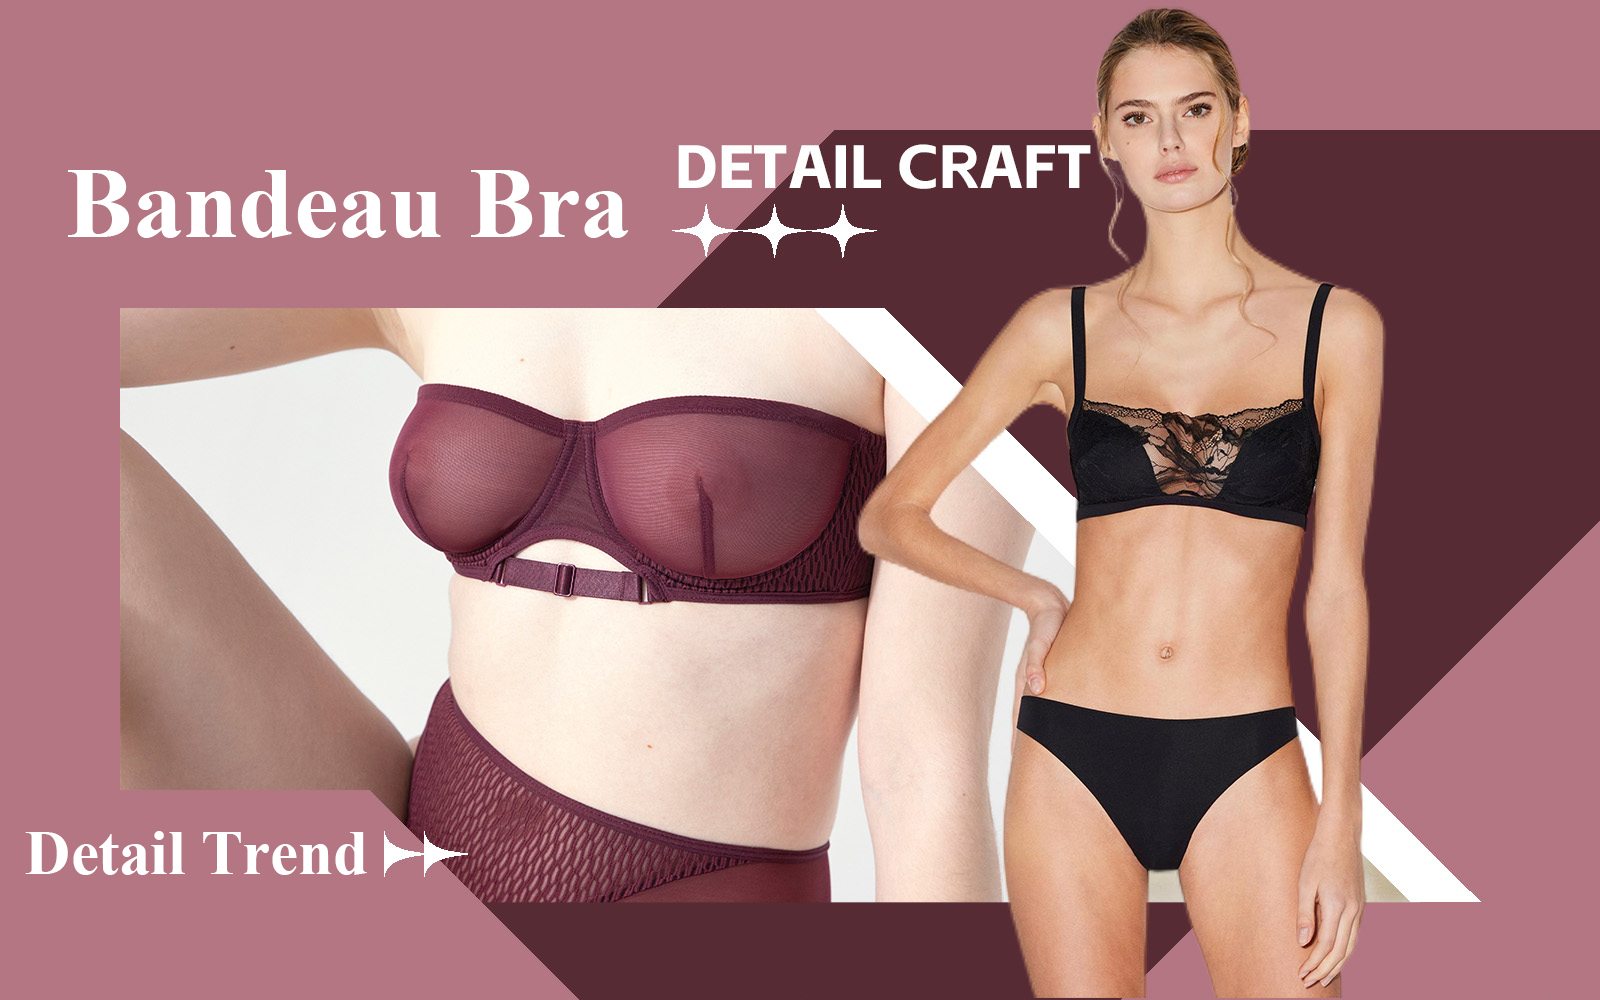 The Detail & Craft Trend for Bandeau Bra